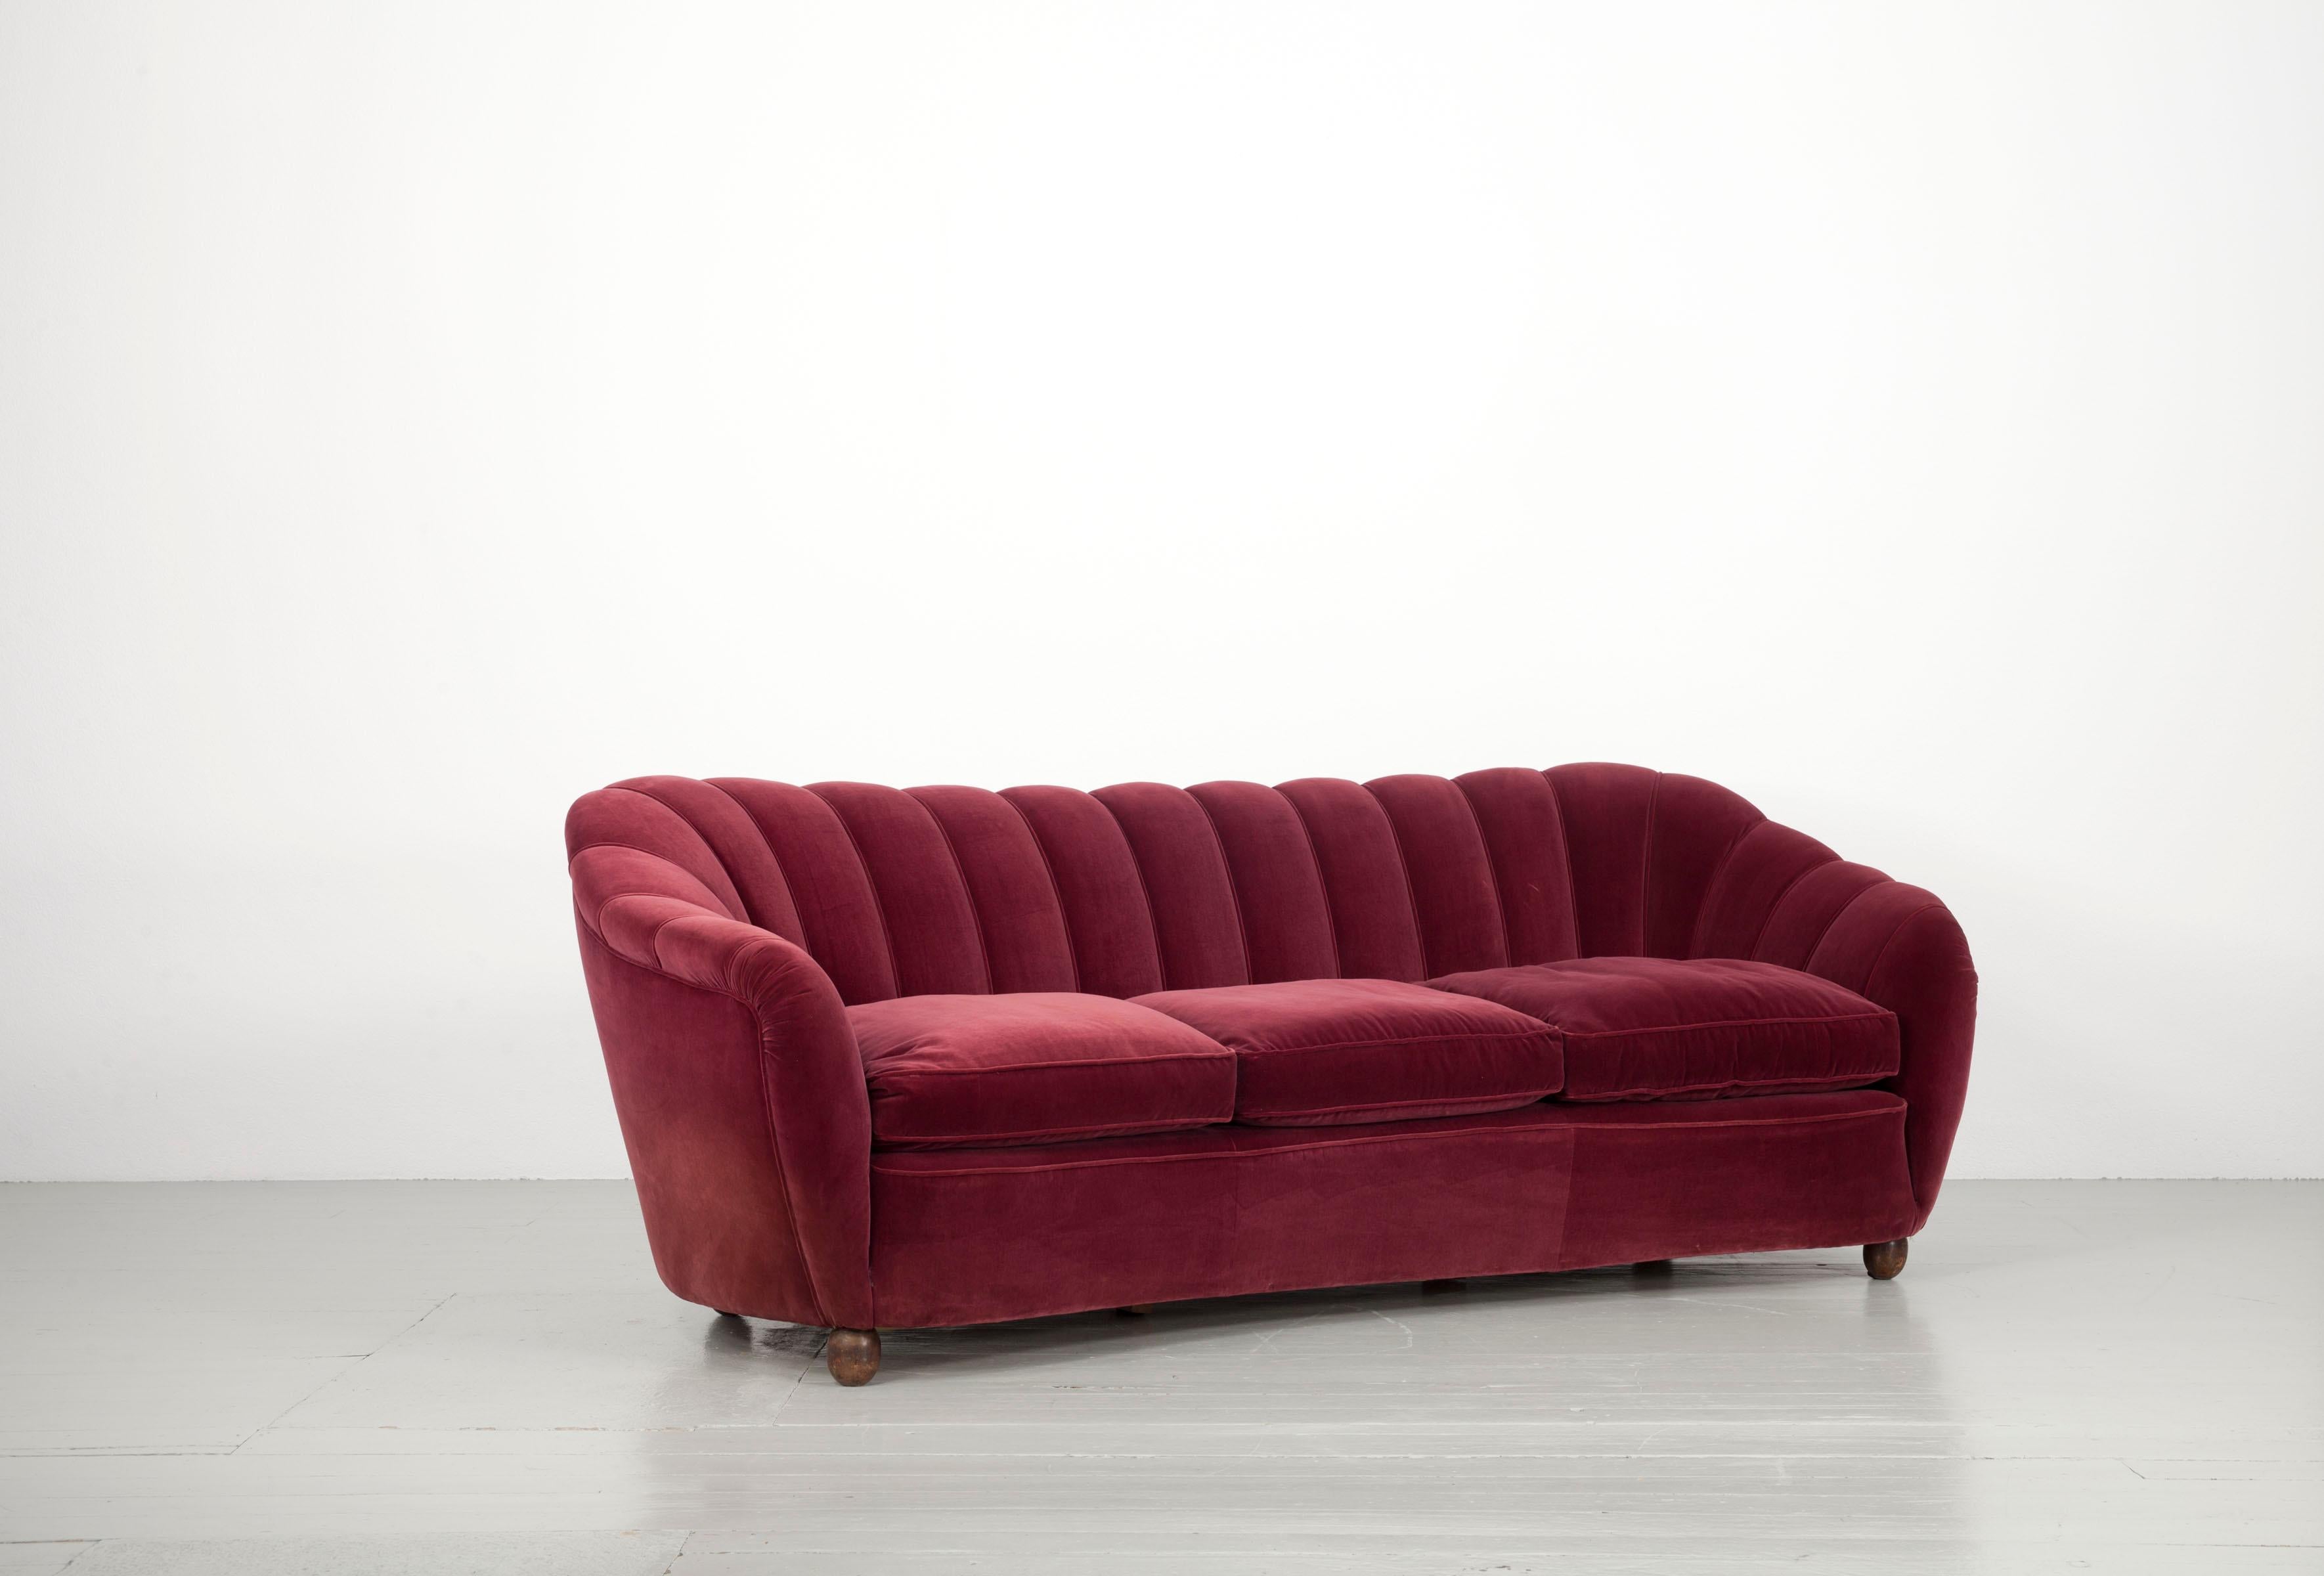 Italian Set of a Massive Sofa and Two Armchairs in Dark Red Velvet Cover, 1940s For Sale 5